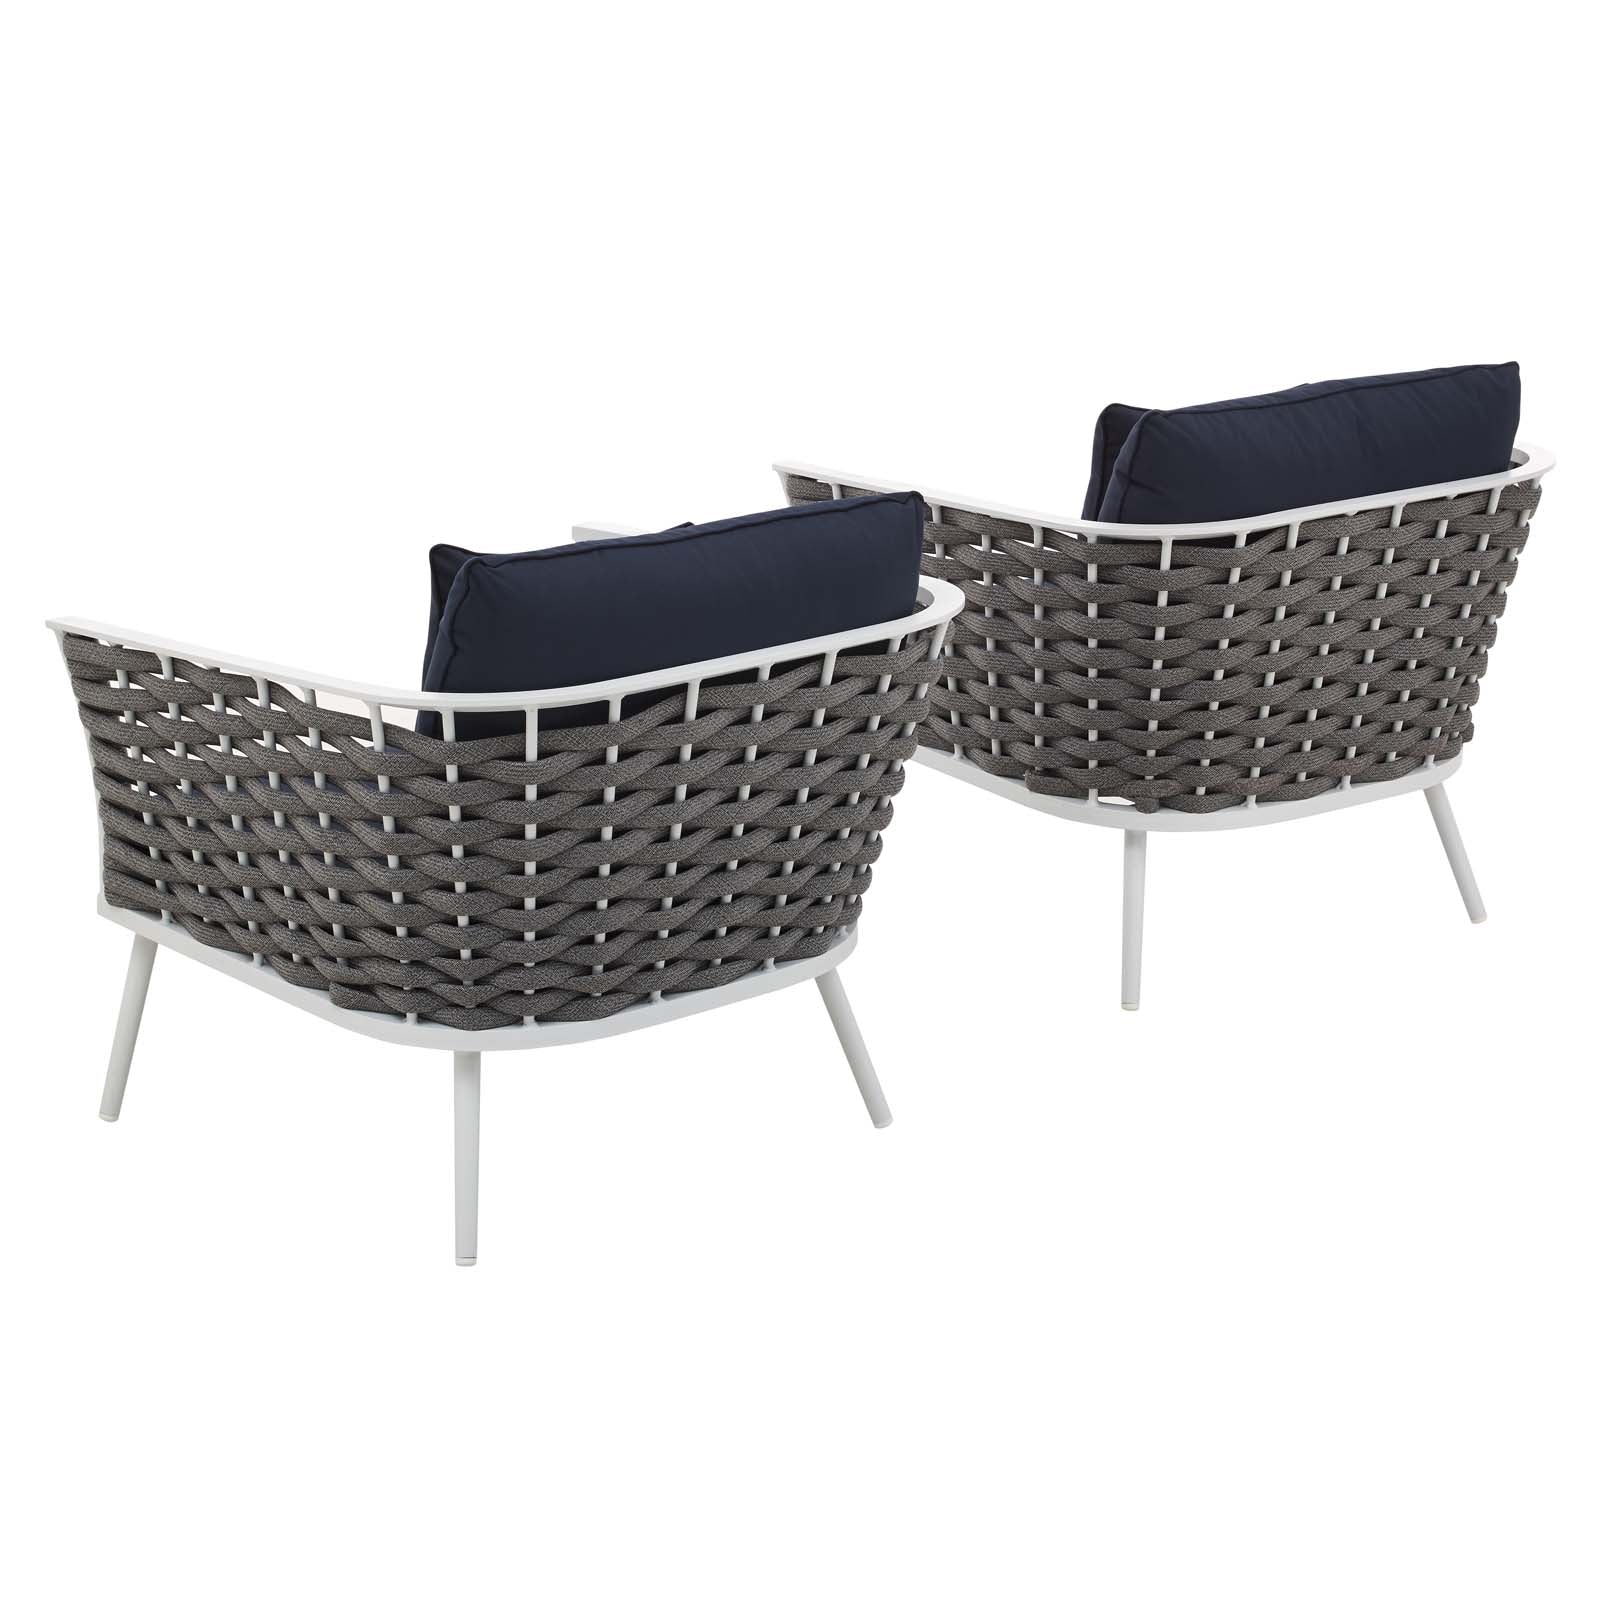 Modway Outdoor Chairs - Stance Armchair Outdoor Patio Set White & Navy (Set of 2)